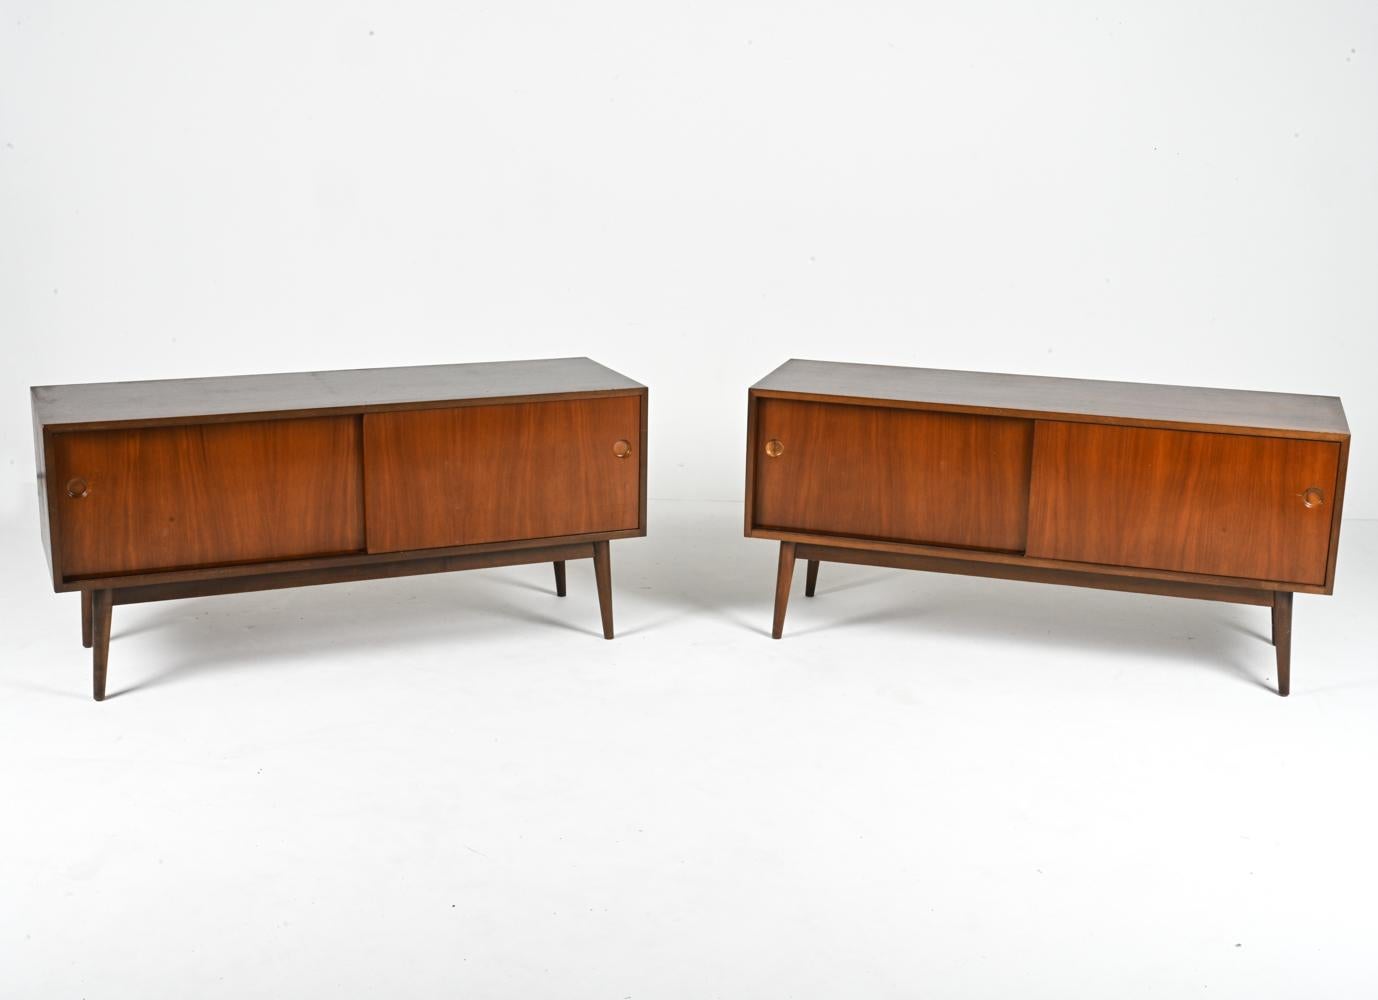 Immerse yourself in the timeless allure of Mid-Century design with this exceptional pair of sideboard cabinets. Meticulously crafted in Germany from luxurious walnut, these pieces seamlessly blend form and function to create an unforgettable